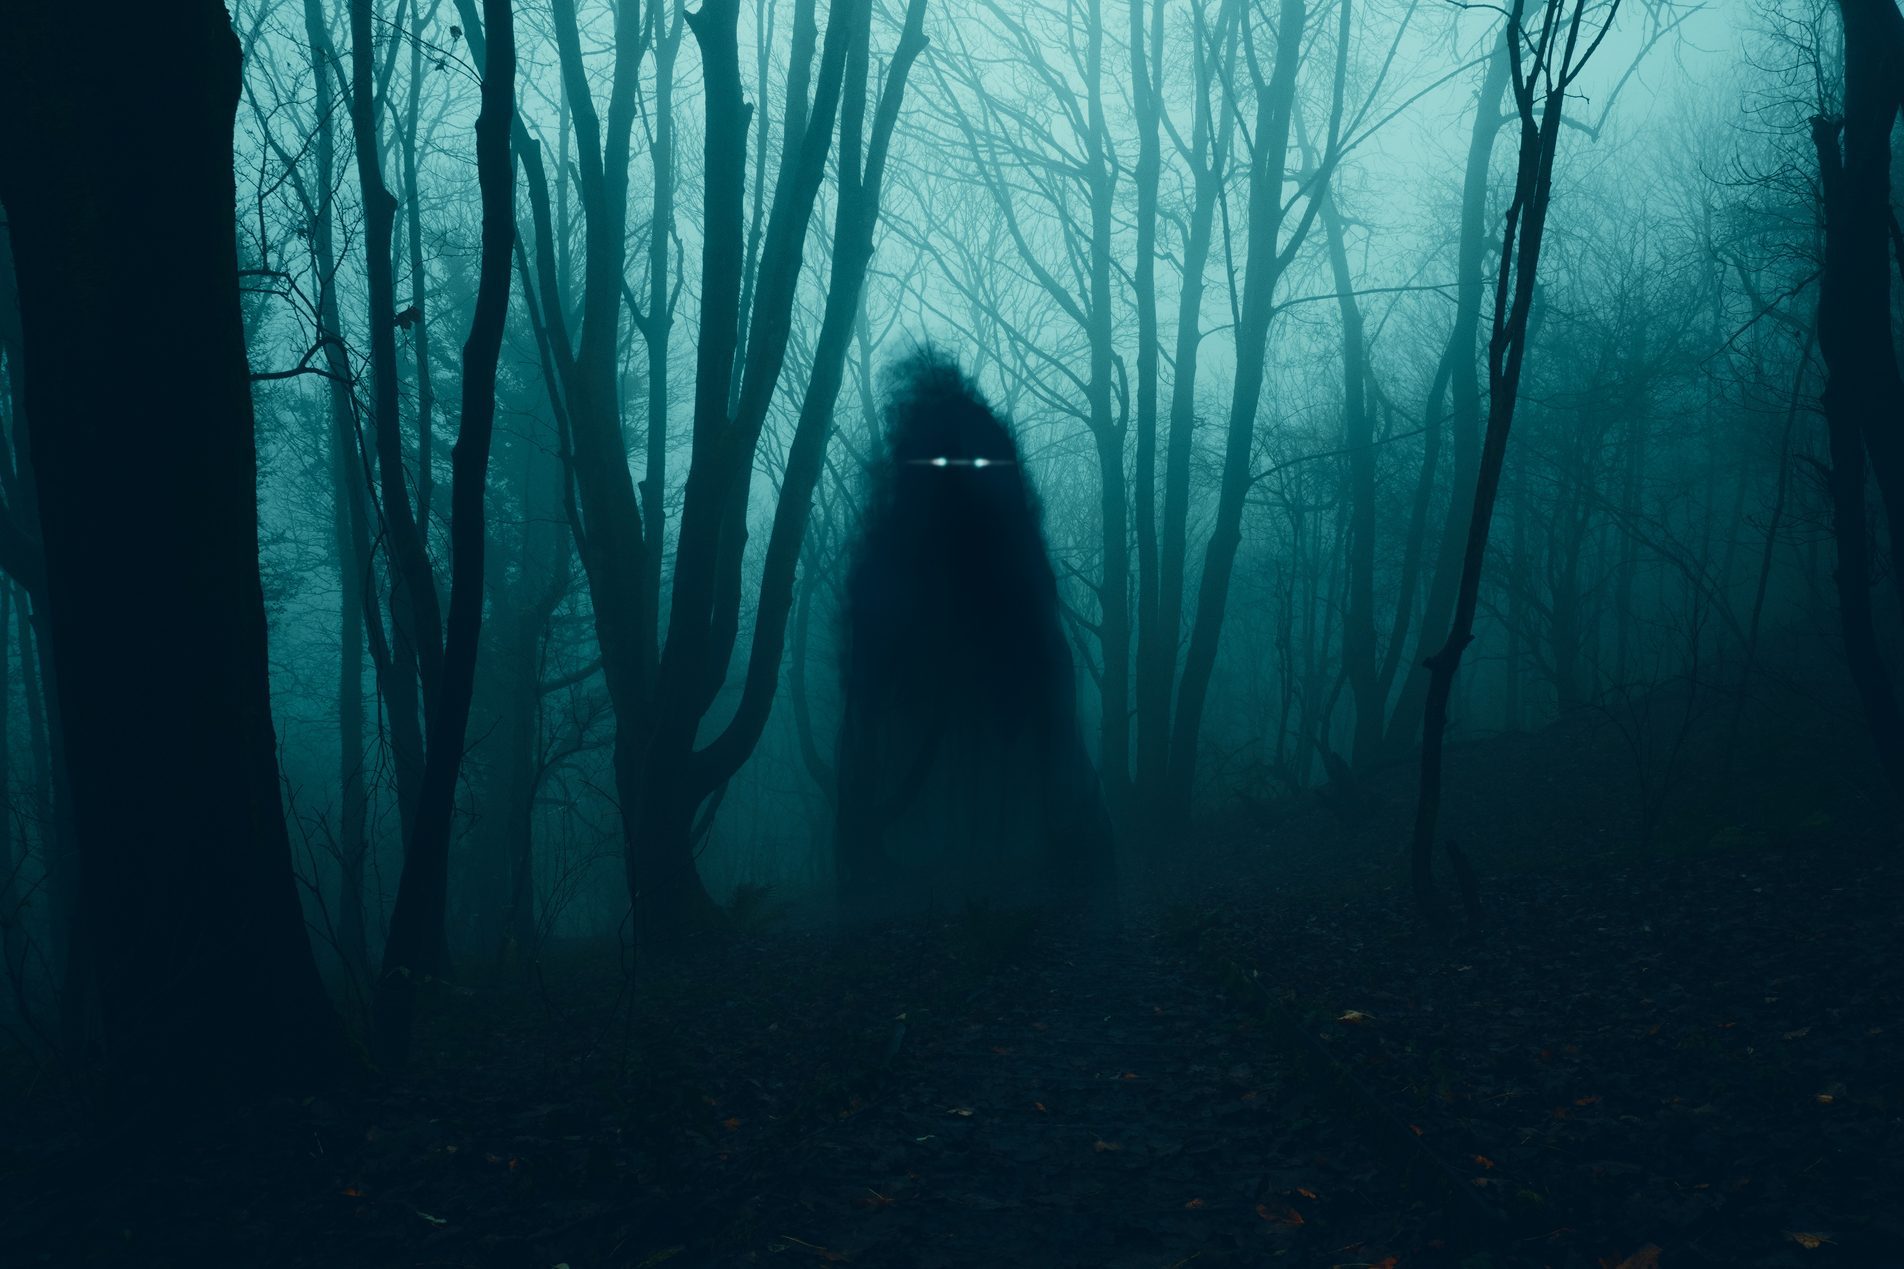 A supernatural concept. Of a ghost with glowing eyes floating above the ground . In a spooky, winter forest at night